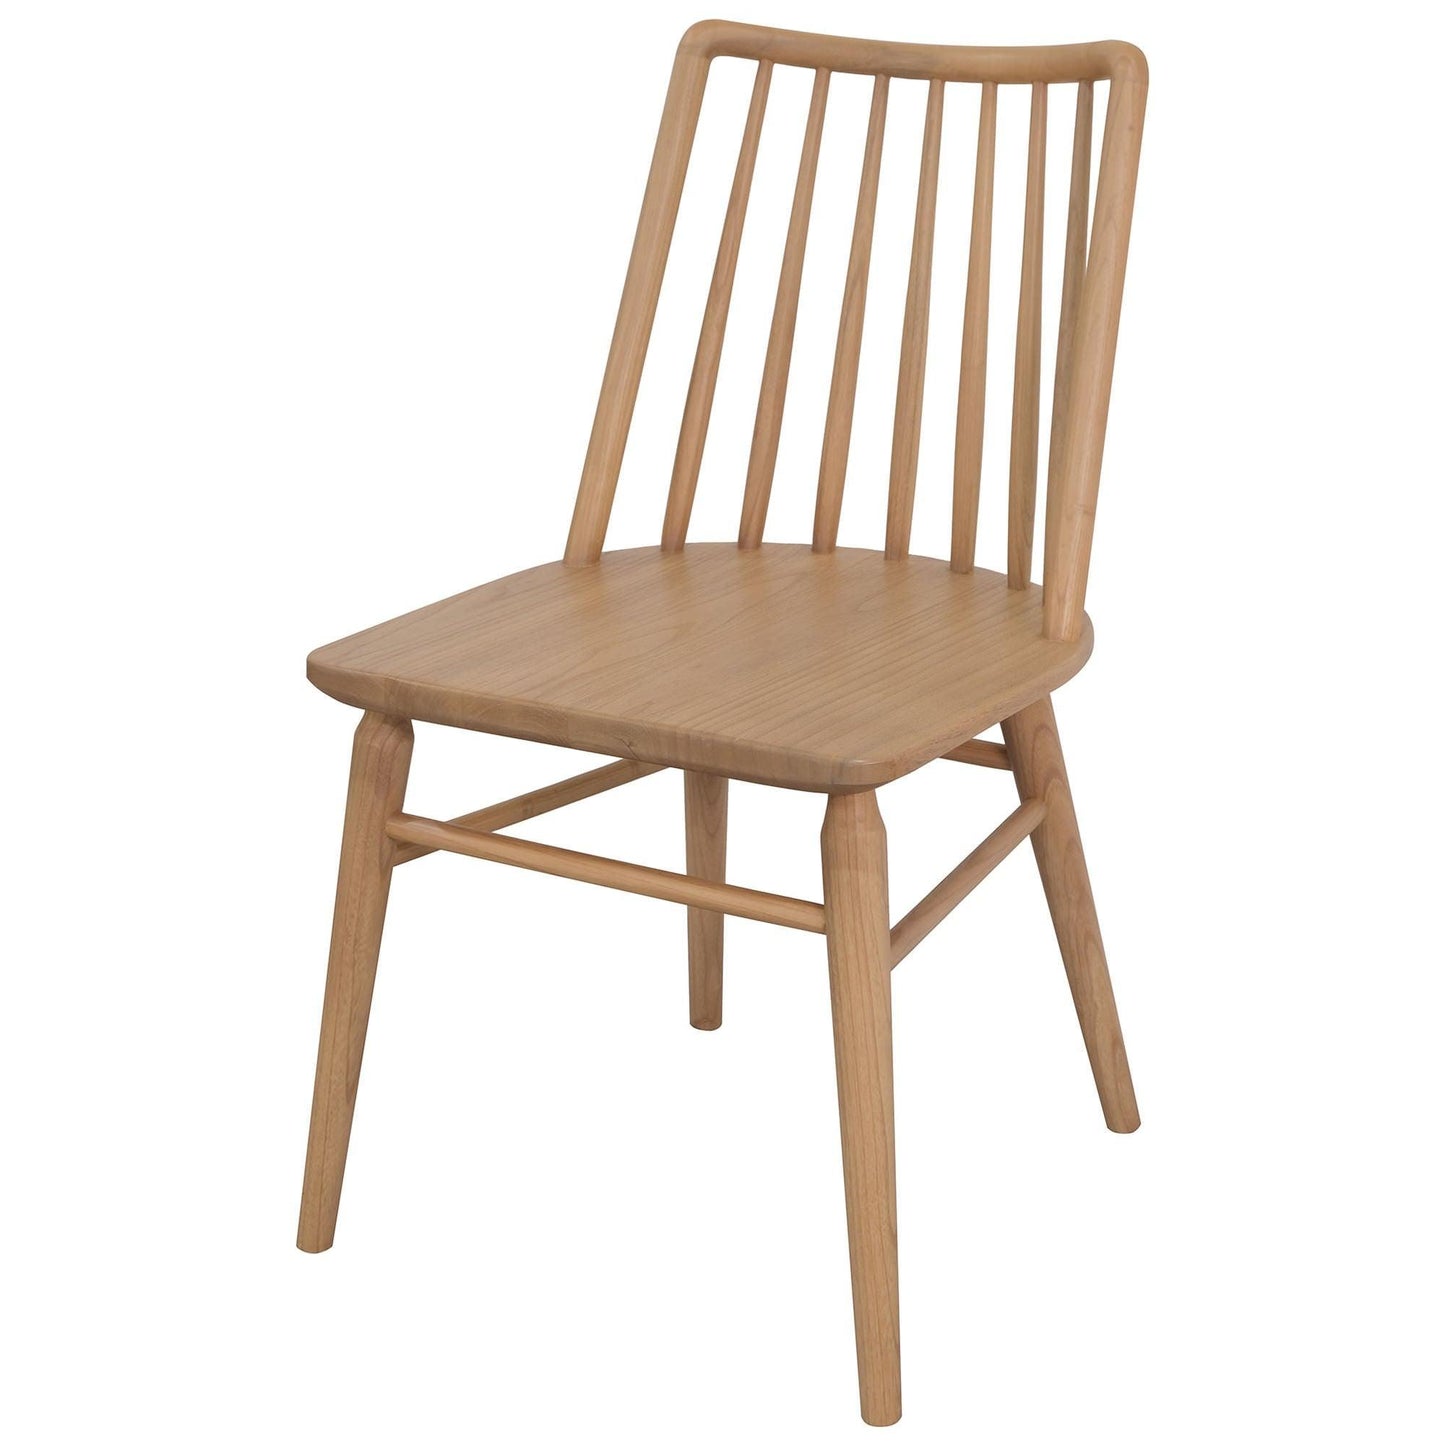 Riviera Solid Oak Dining Chair - Set fo 2 (Natural) - Dining ChairCH 050 RVR Set of 2 (N)754169483524 3